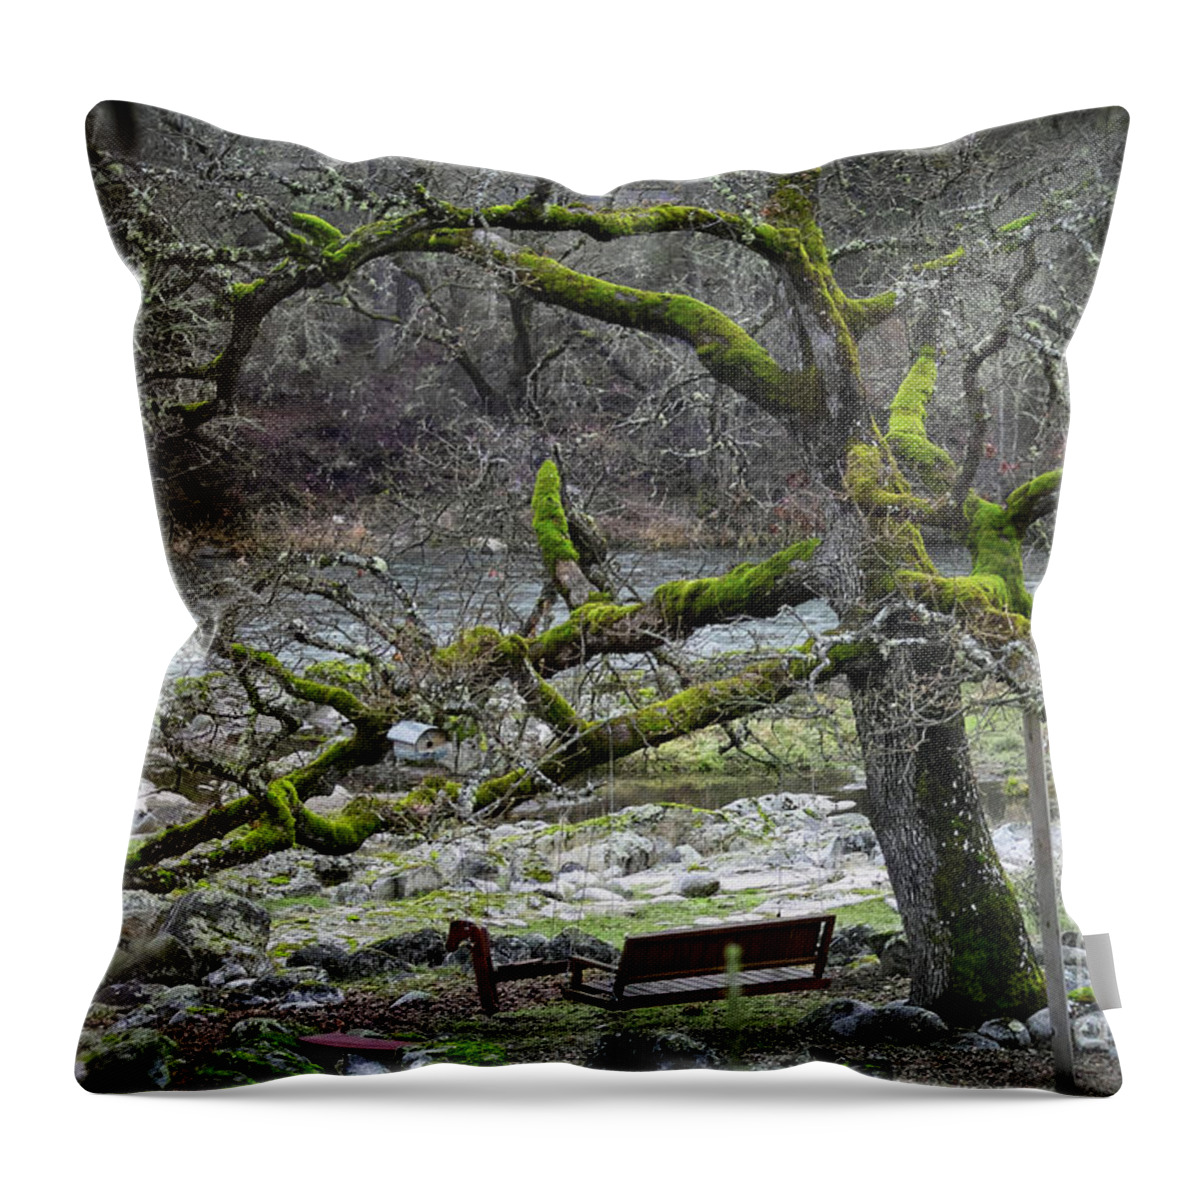 Rouge River Throw Pillow featuring the photograph Oak On The Rogue River by Theresa Fairchild